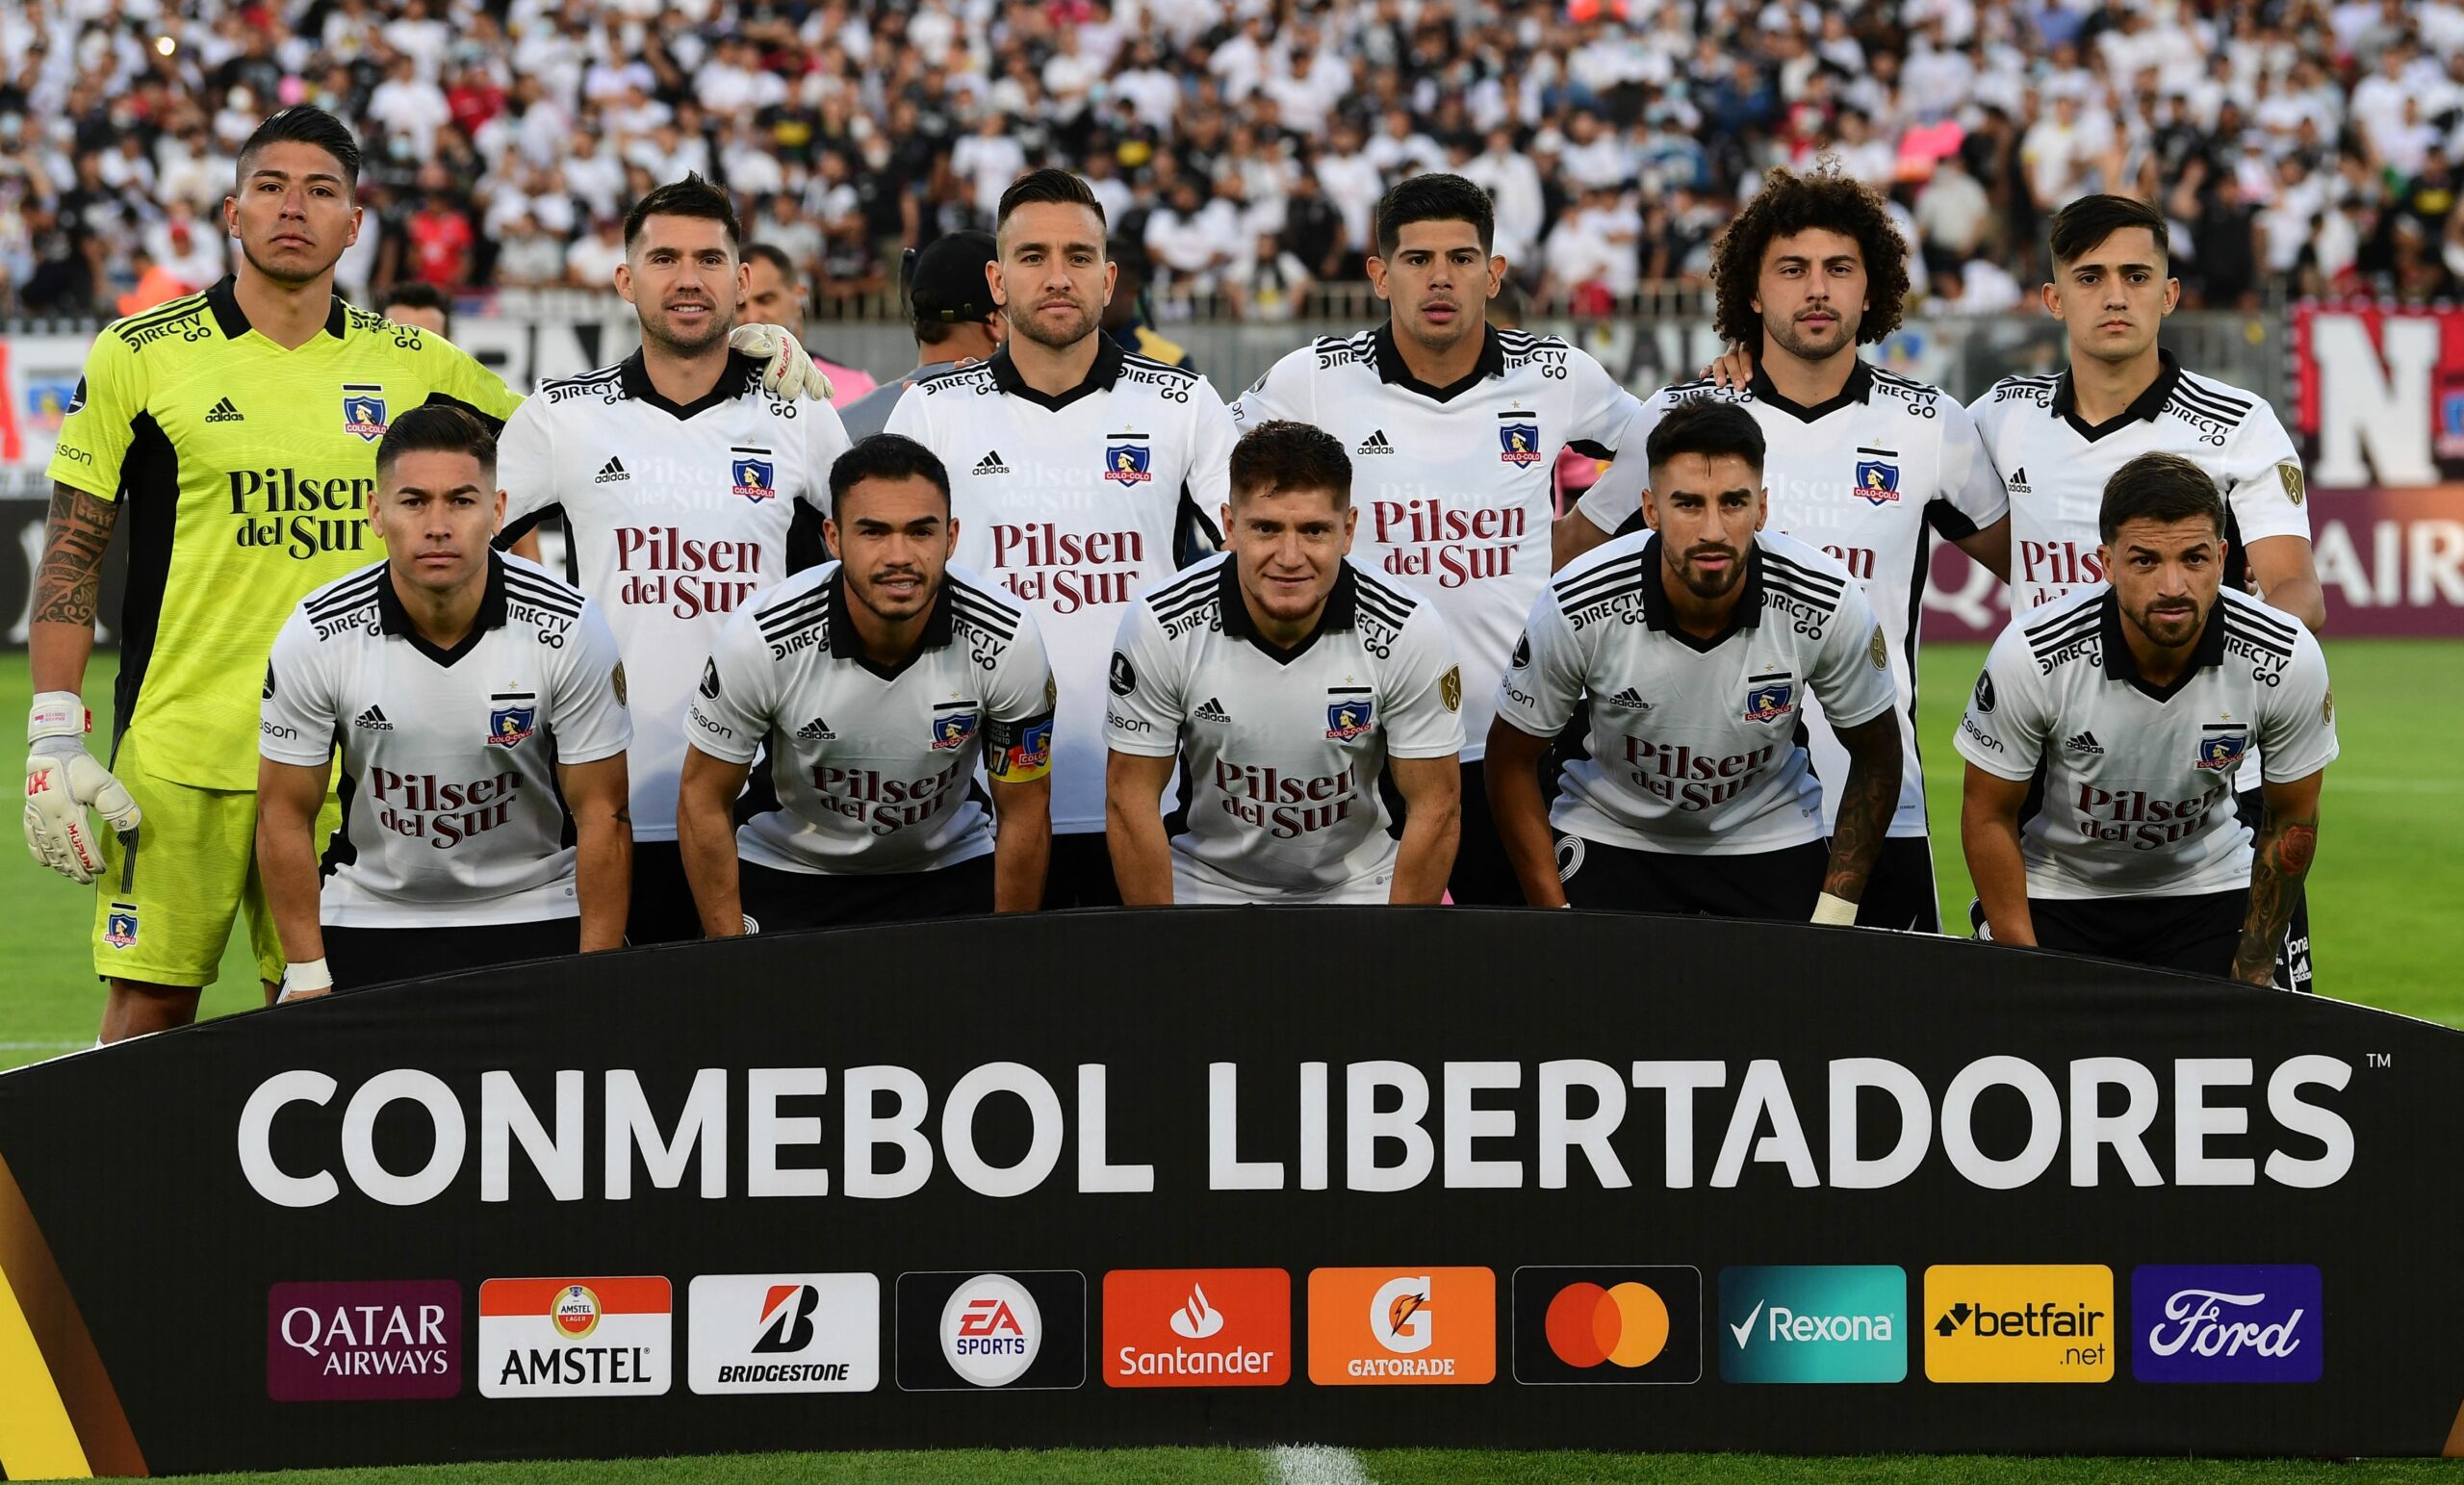 Chile's Colo Colo players pose before their Copa Libertadores group stage first leg football match against Peru's Alianza Lima at the Monumental Stadium in Santiago, on April 13, 2022. (Photo by MARTIN BERNETTI / AFP) (Photo by MARTIN BERNETTI/AFP via Getty Images)